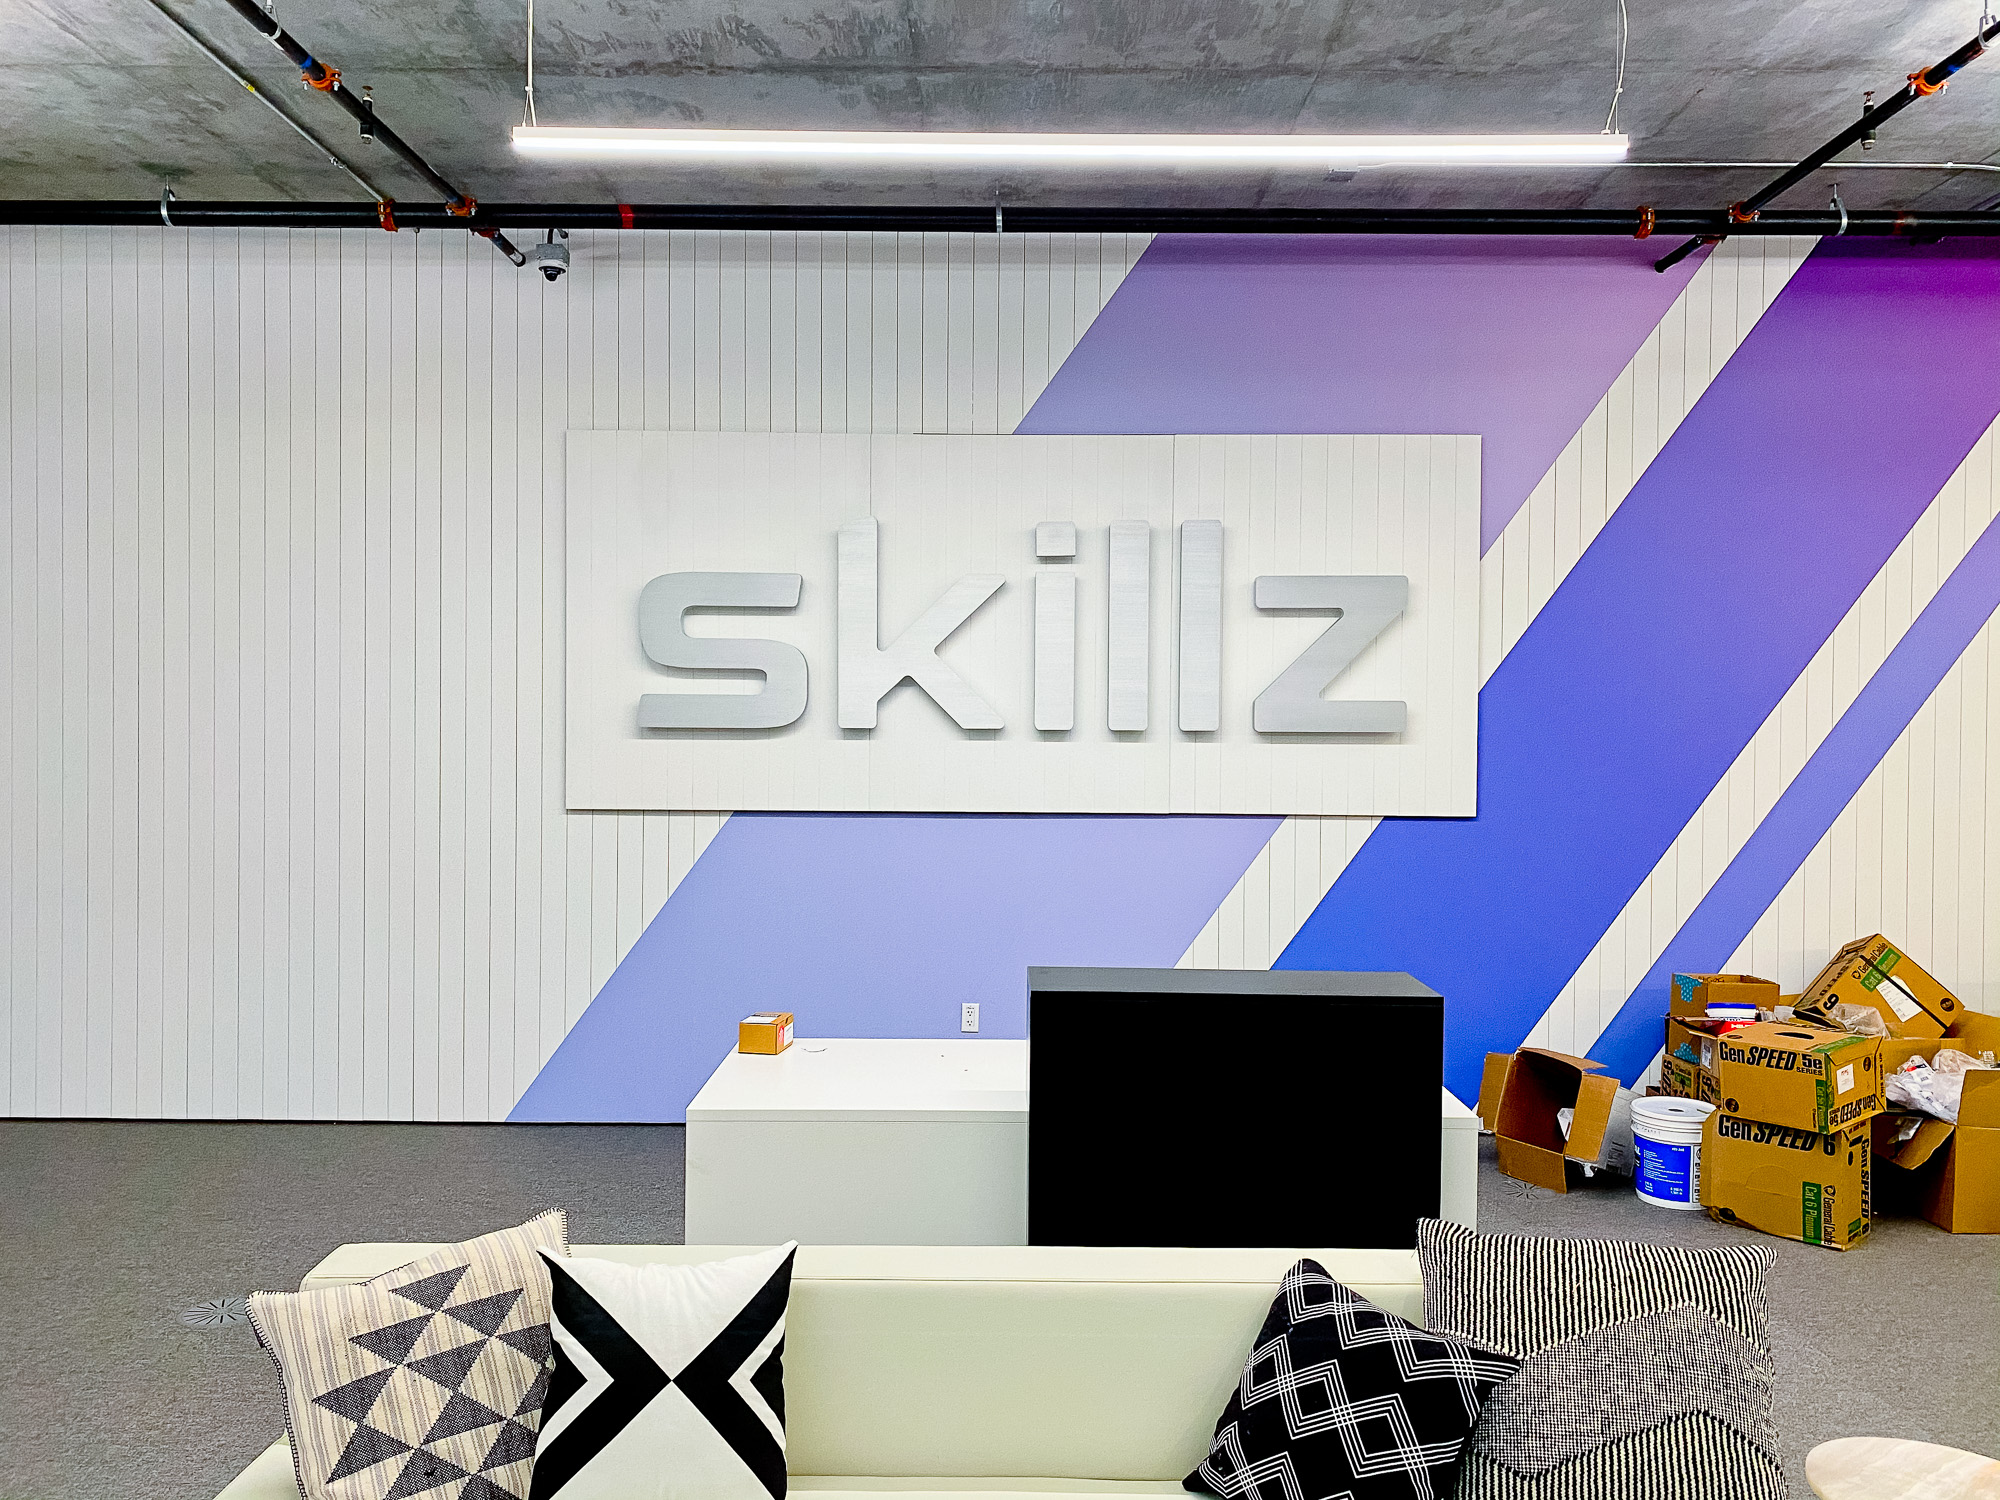 Illuminated metal sign for the reception desk at the San Francisco office of Skillz, an online mobile multiplayer competition platform.